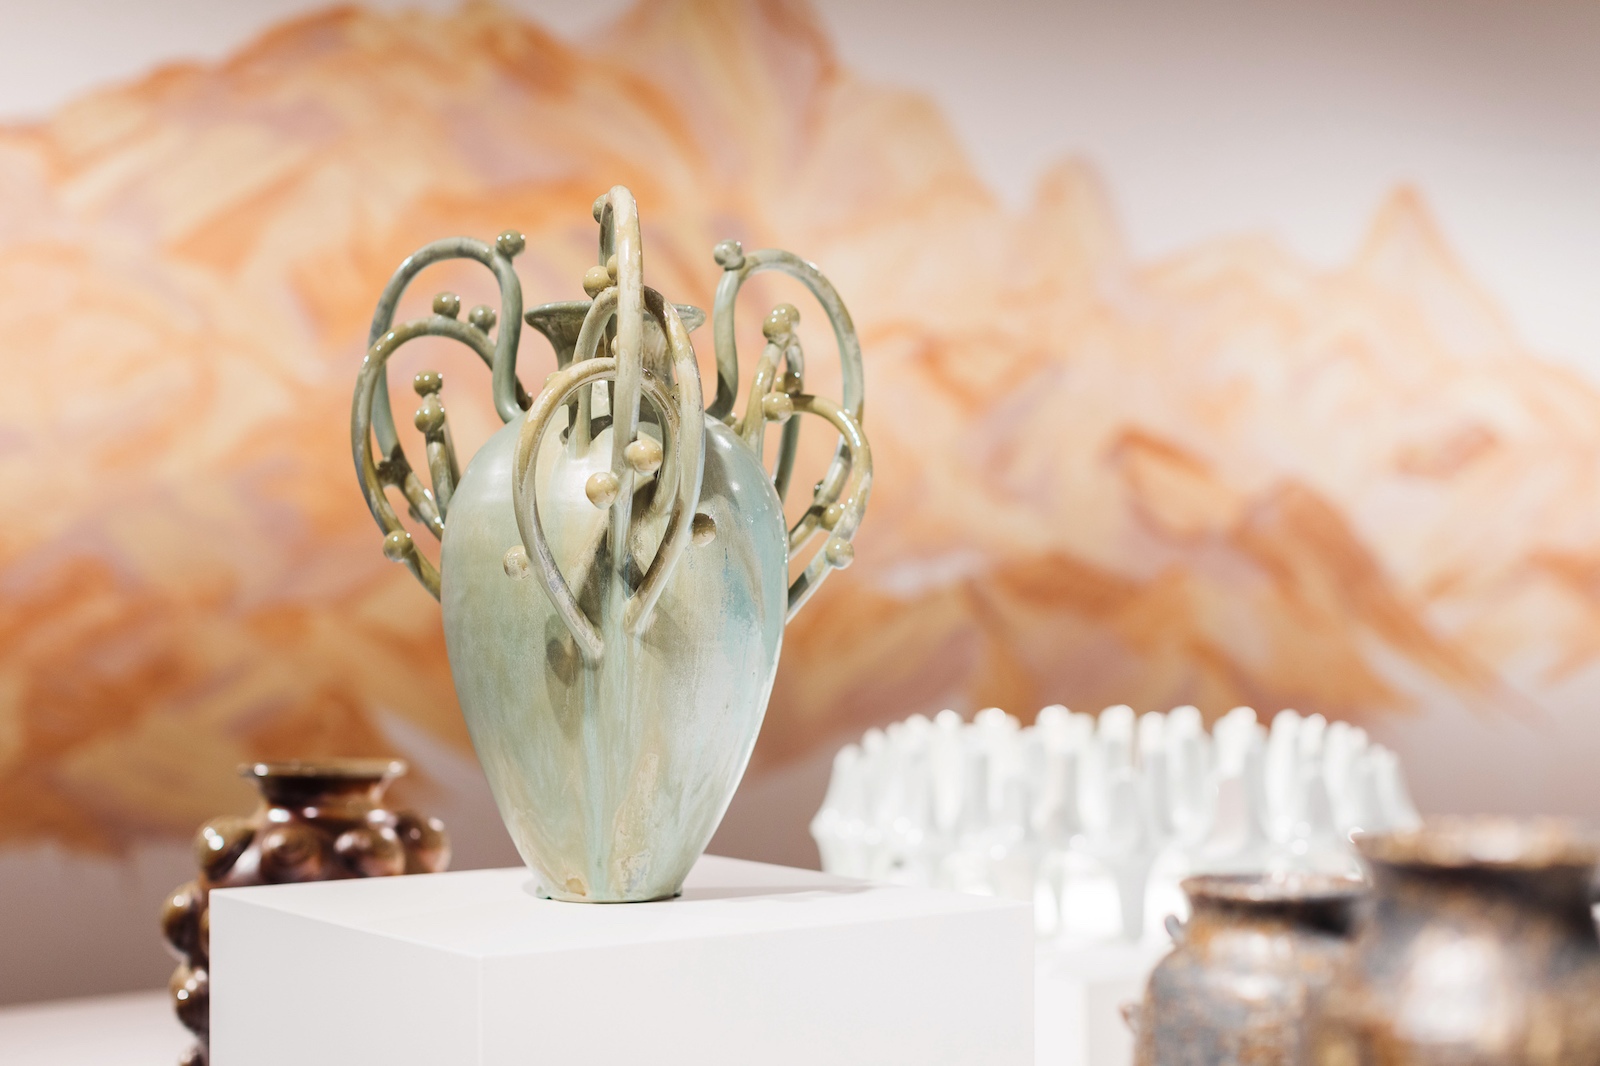 A pale green vase with multiple intricate handles sits on a plinth